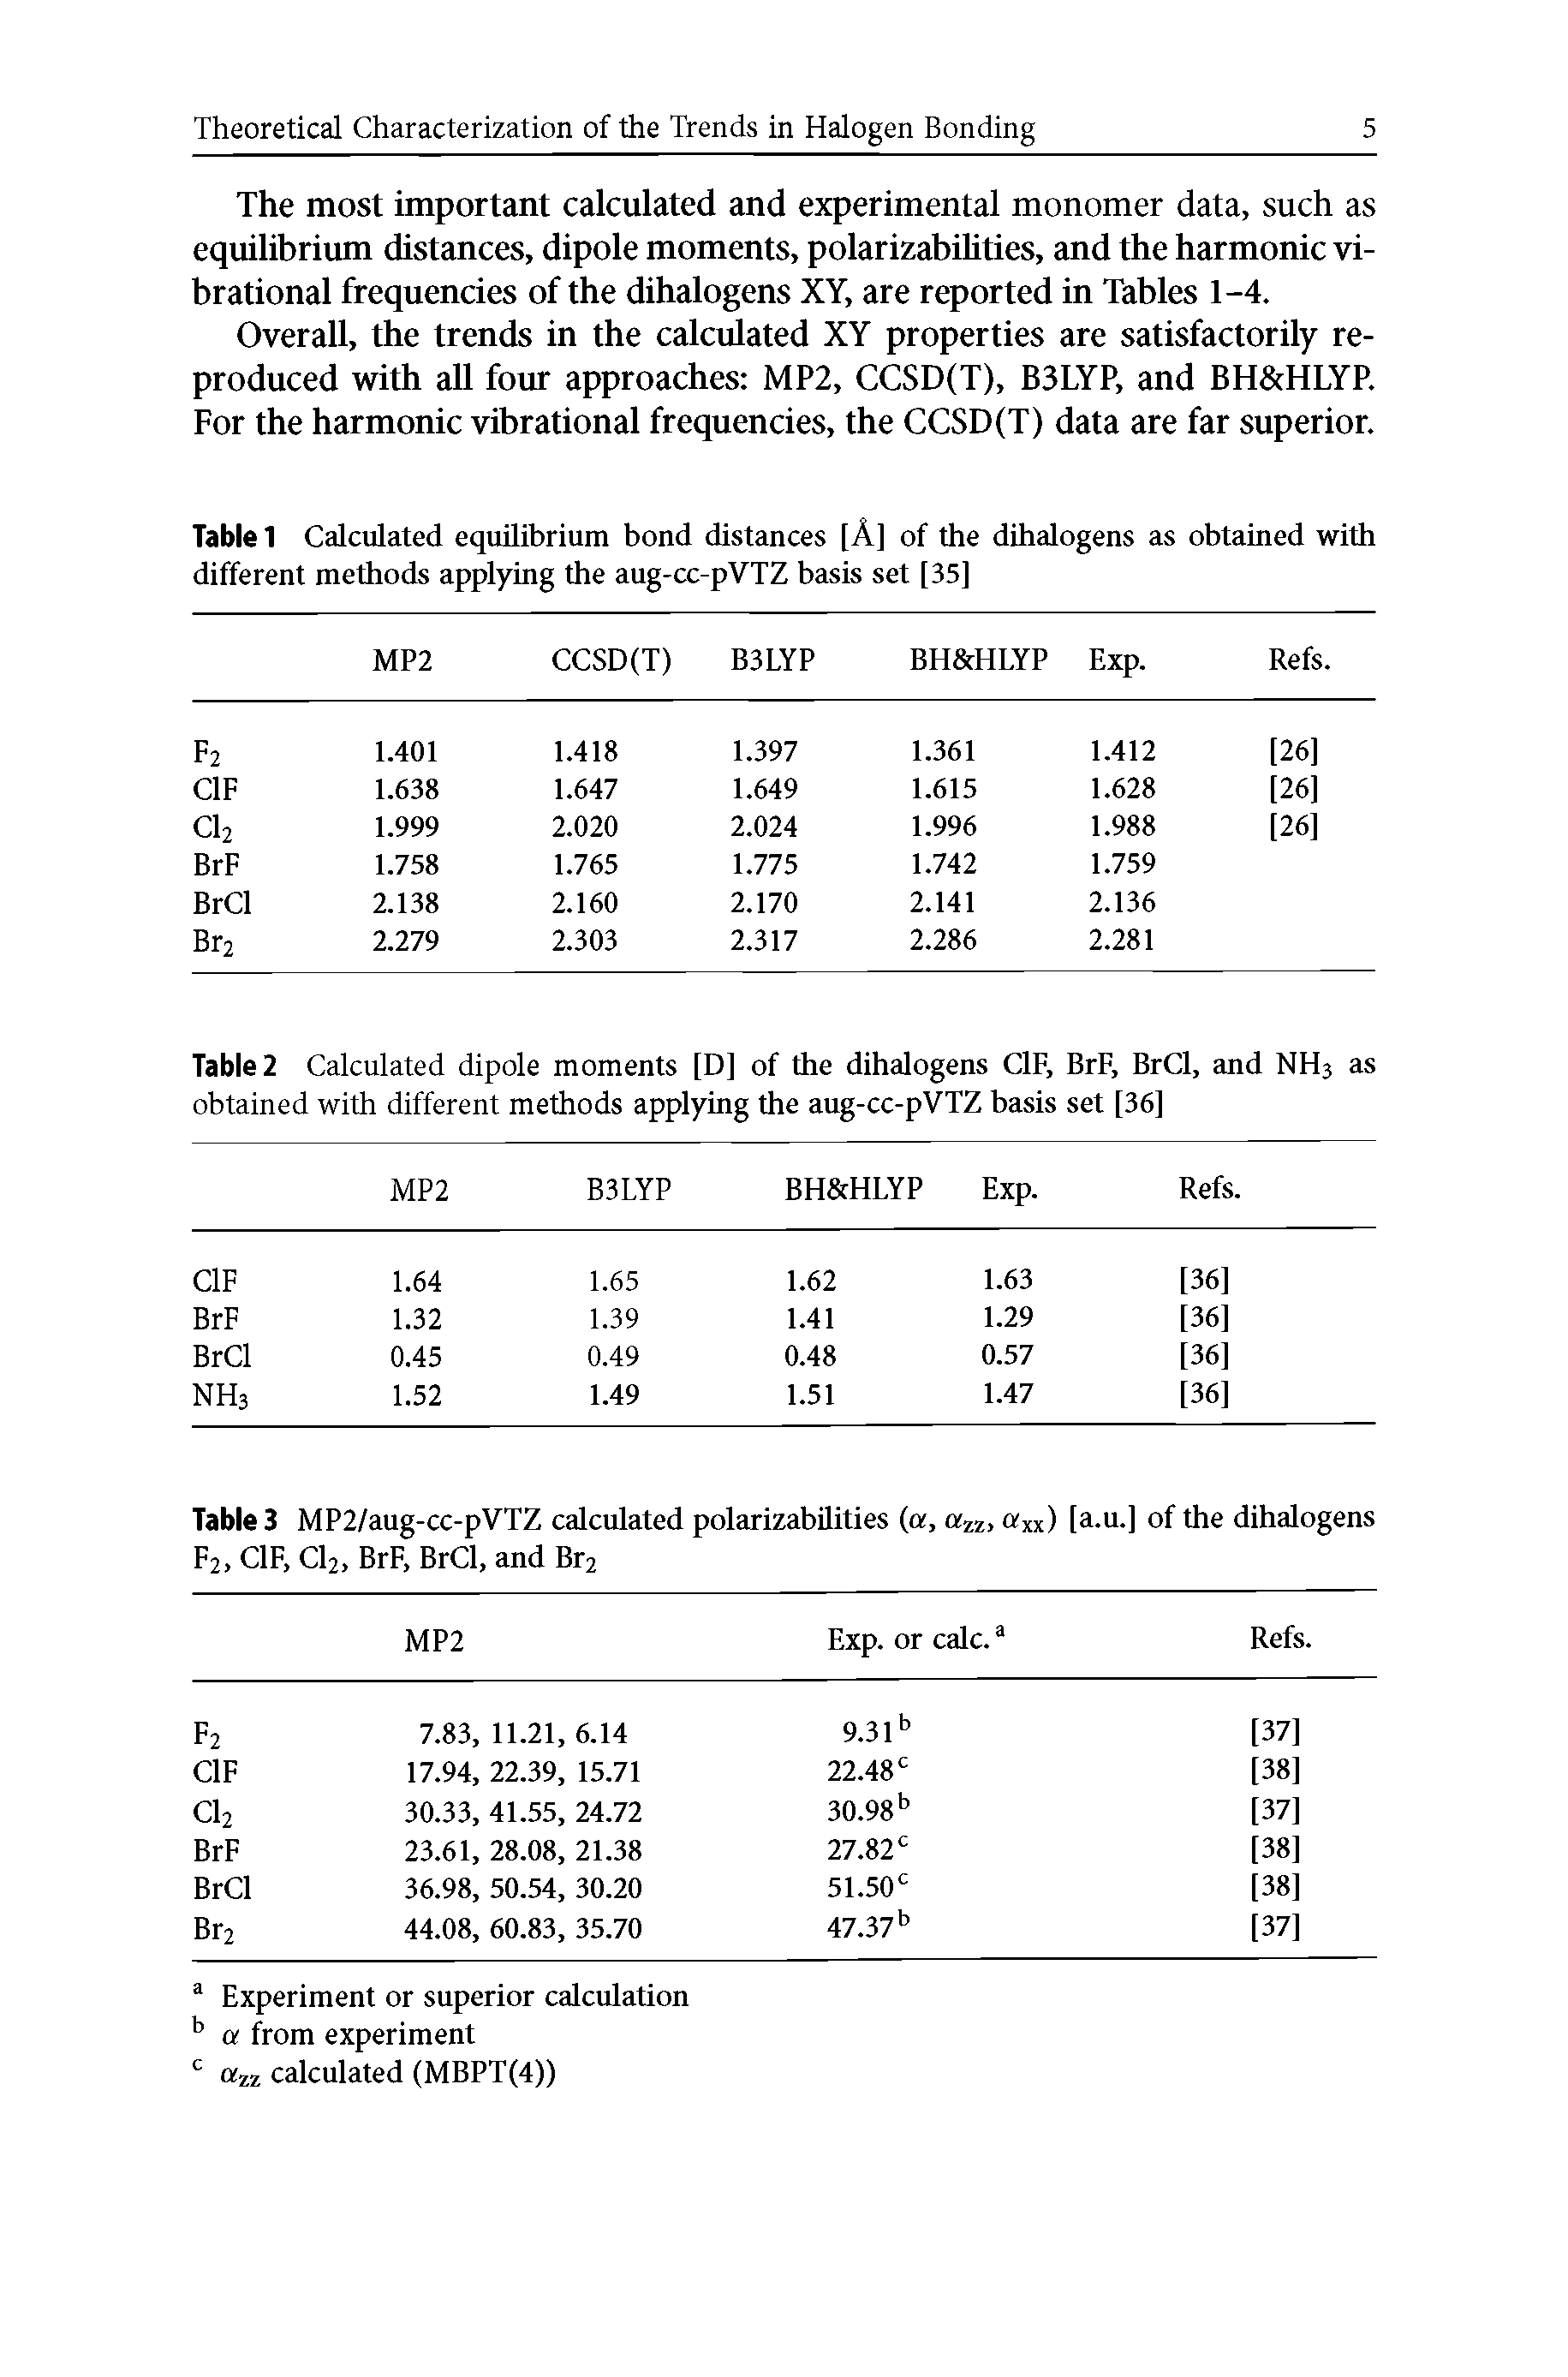 Table 1 Calculated equilibrium bond distances [A] of the dihalogens as obtained with different methods applying the aug-cc-pVTZ basis set [35]...